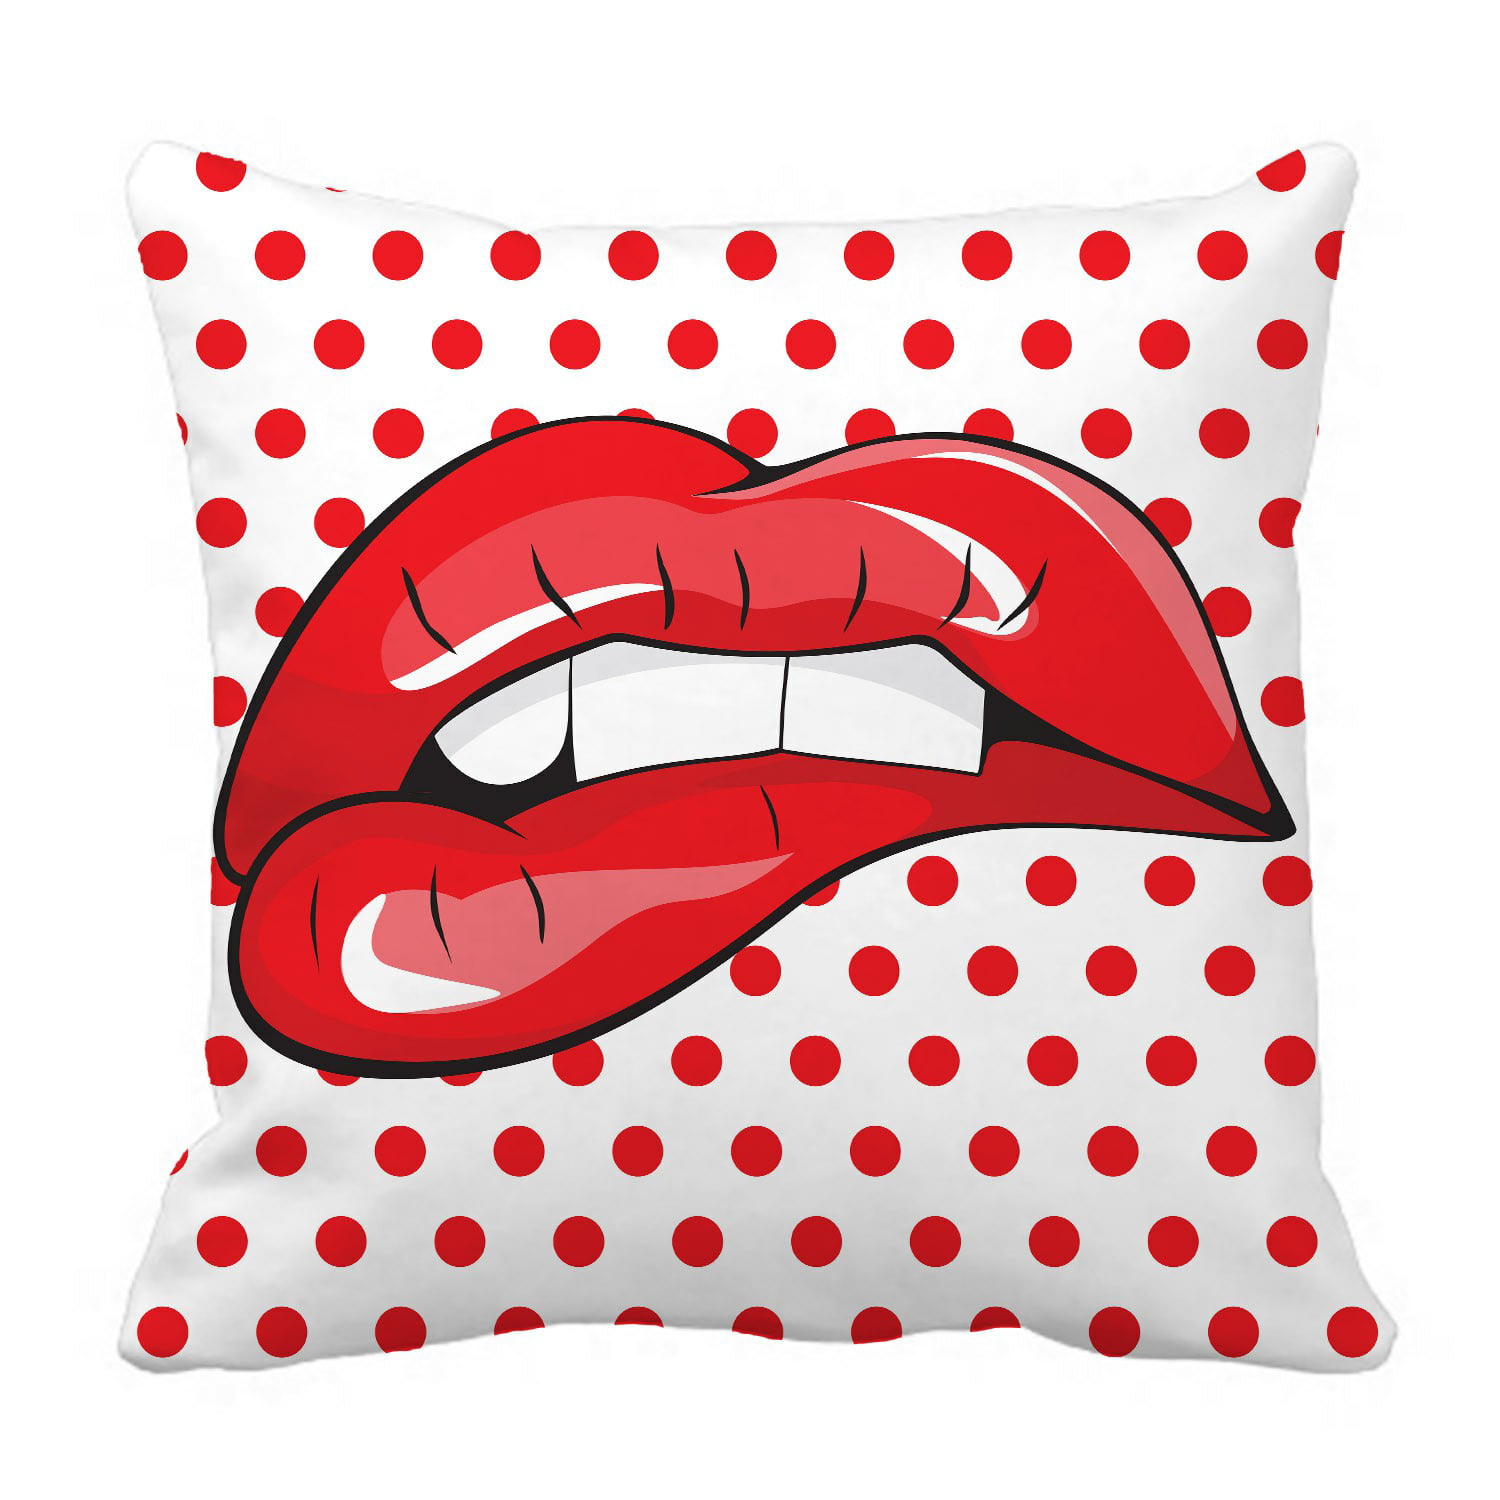 Throw Pillow Home D\u00e9cor Accent Pillow Pop Art Pillow Cover| Colorful Cushion Cover Decorative Pillow Cover| 16x16 inch